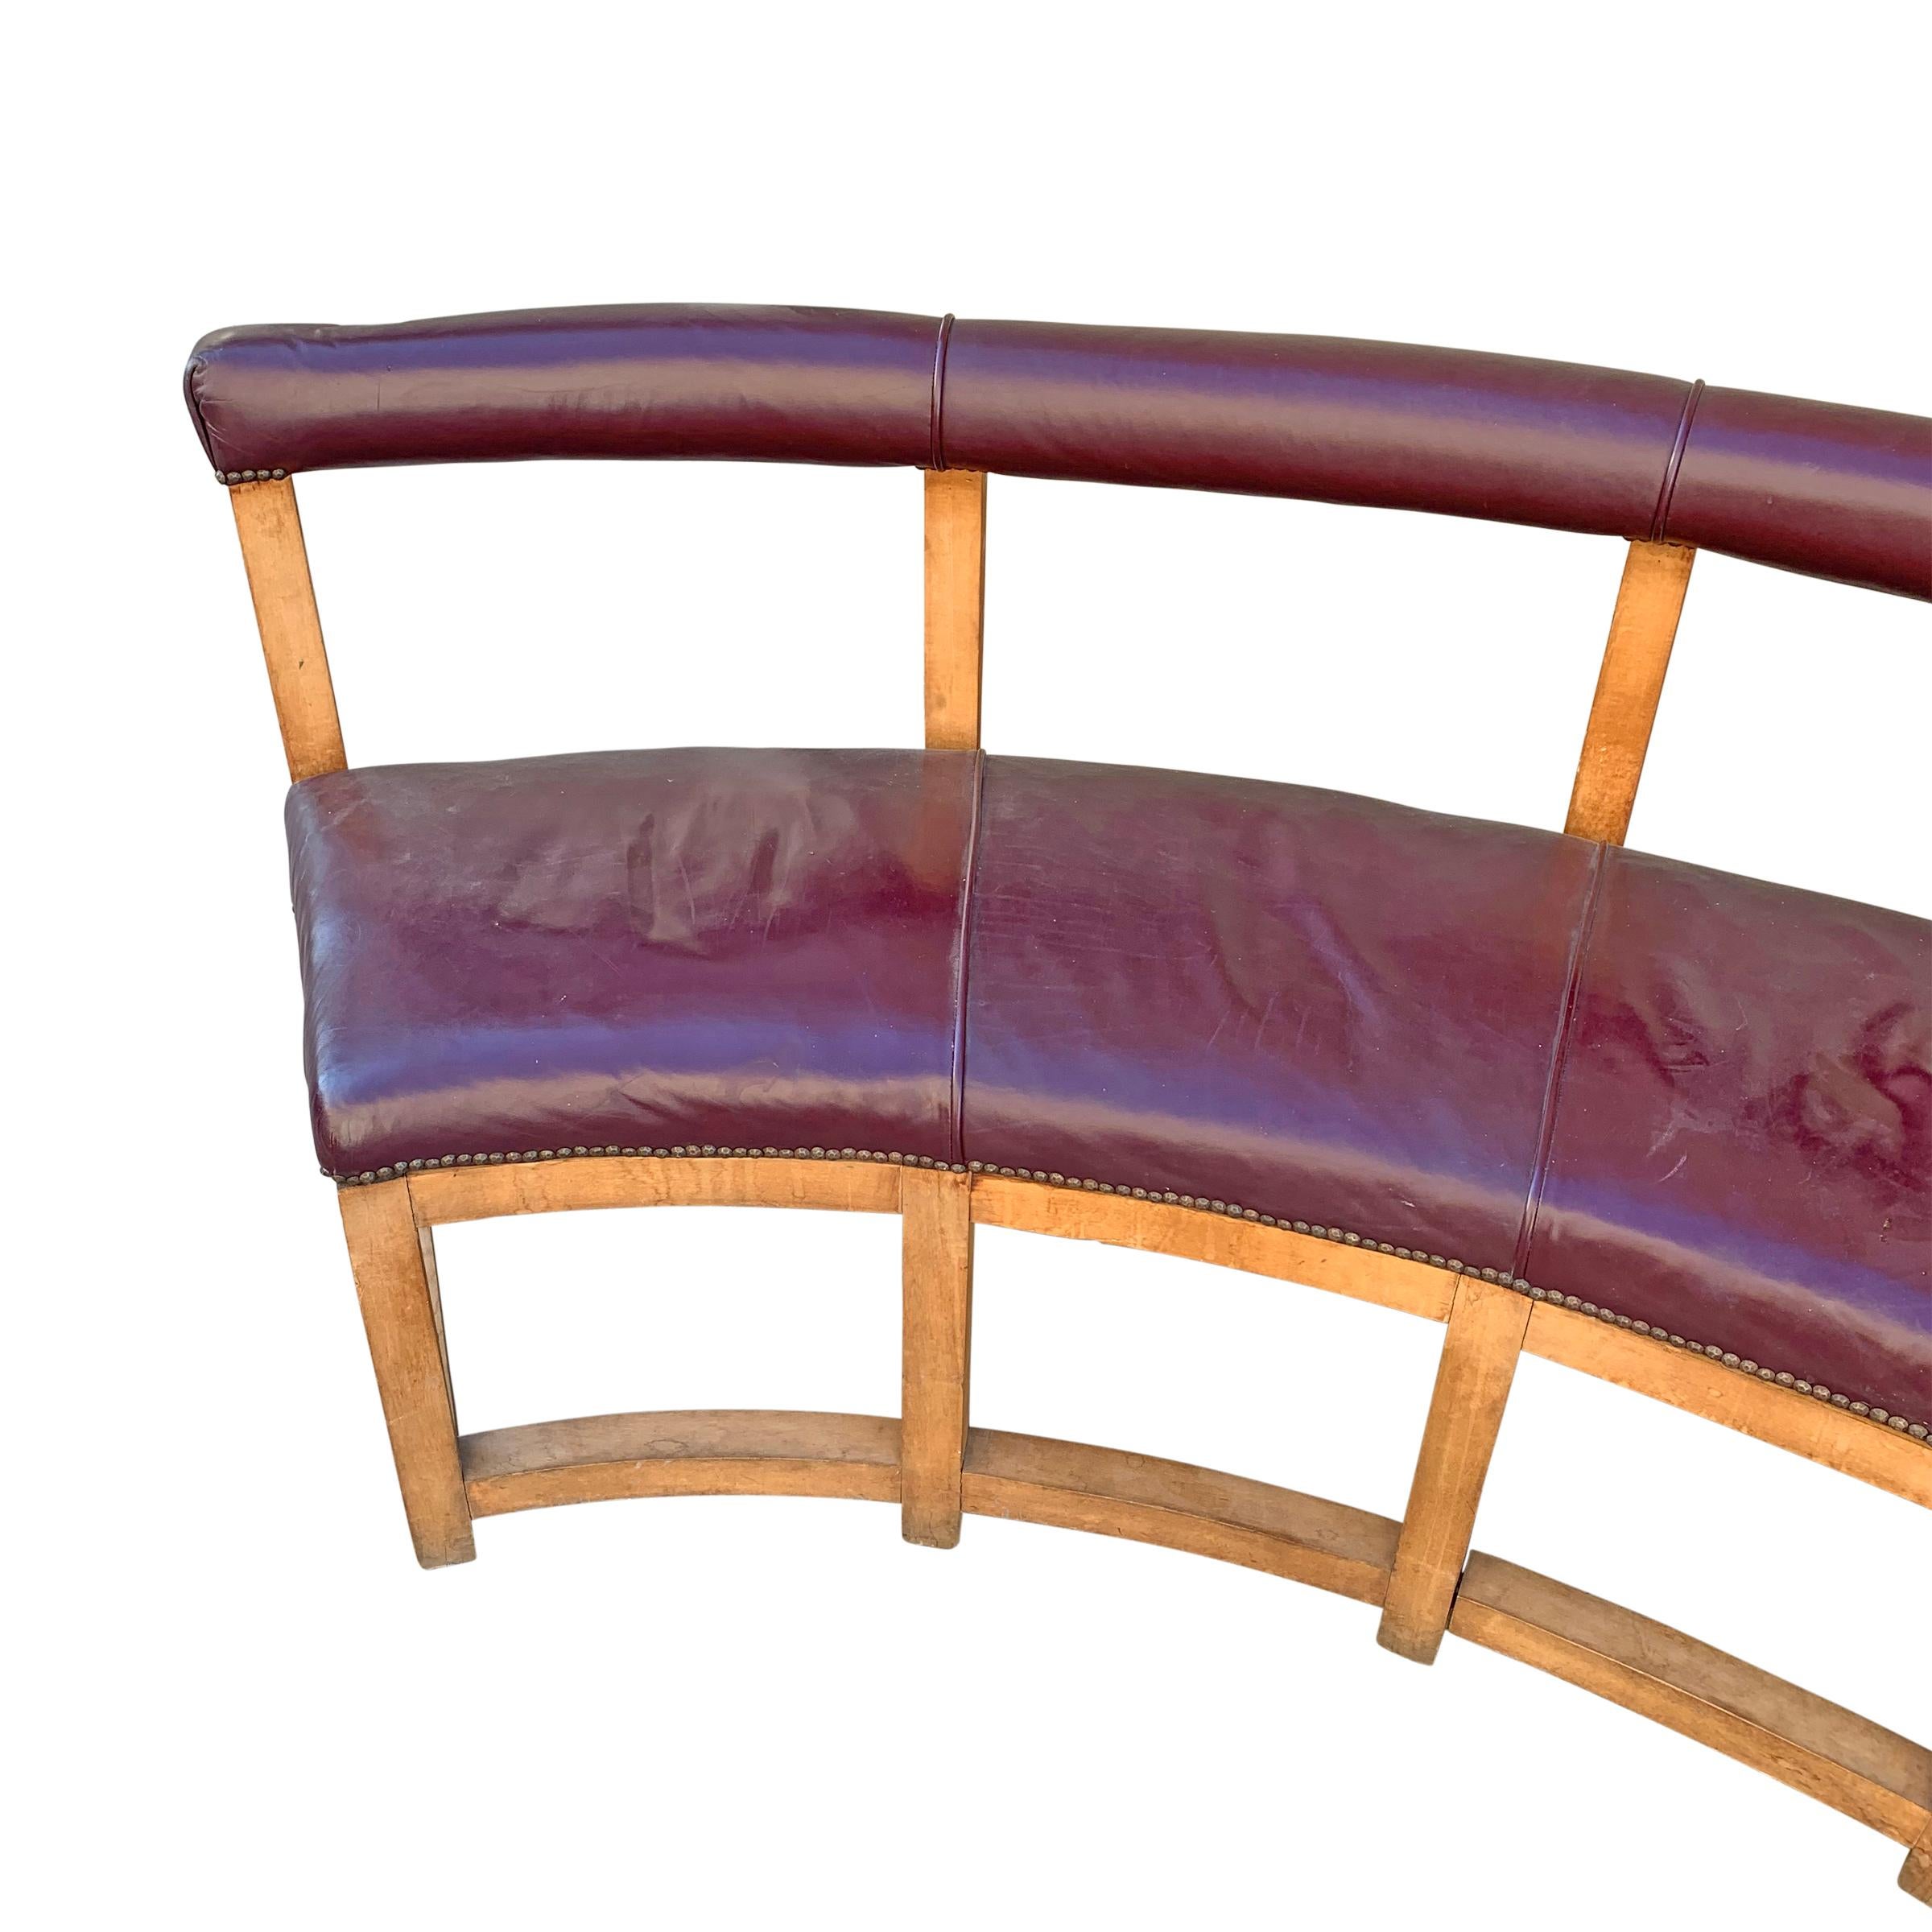 Pair of Vintage Monumental Curved Benches 2